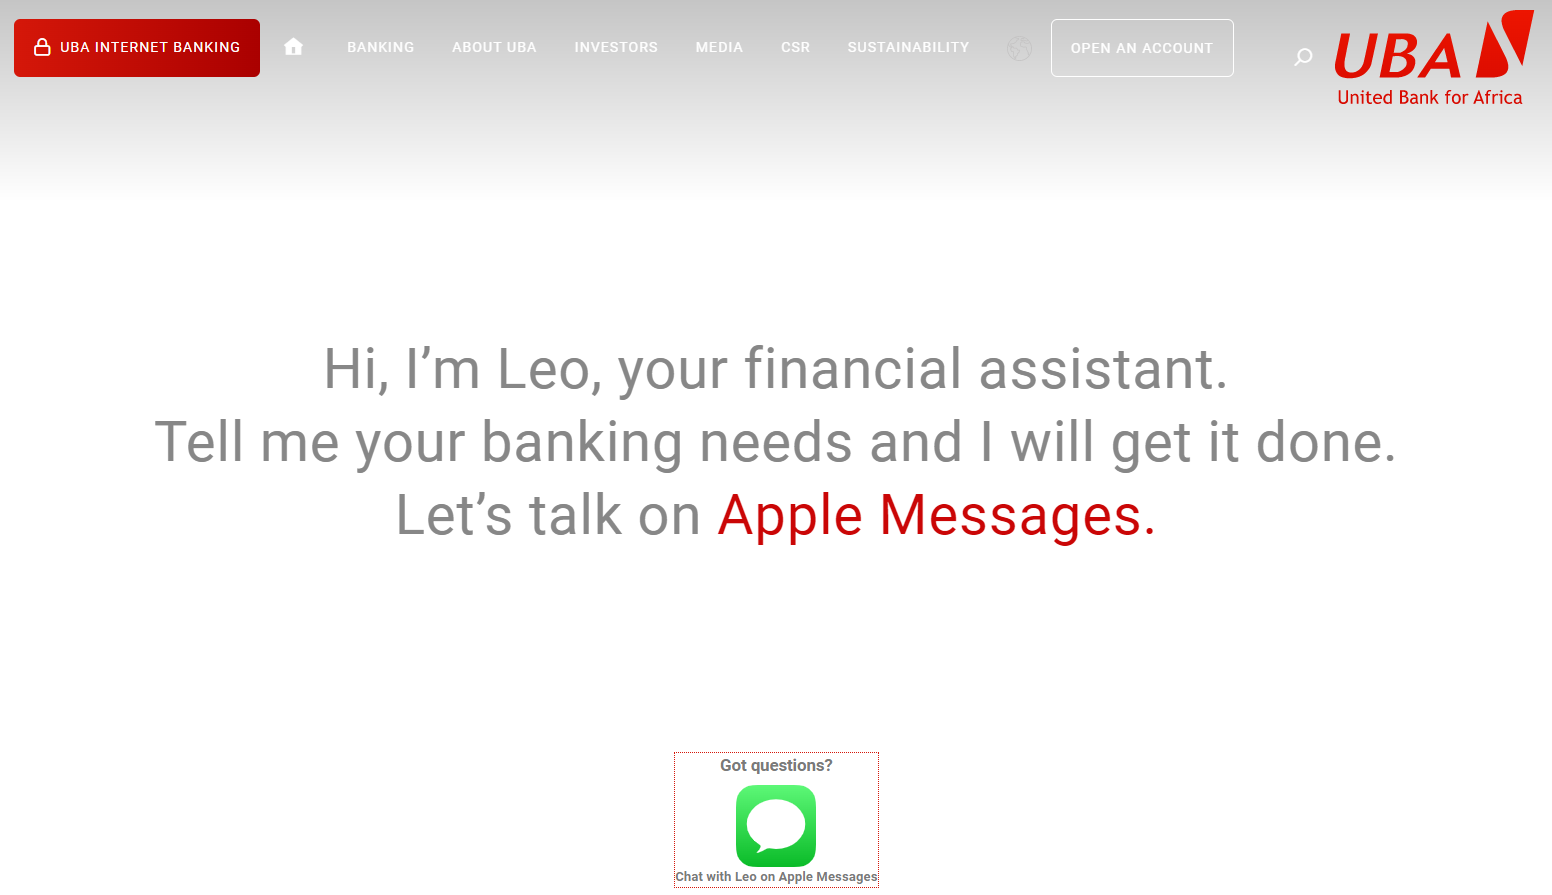 UBA's website showing their contact on iMessage